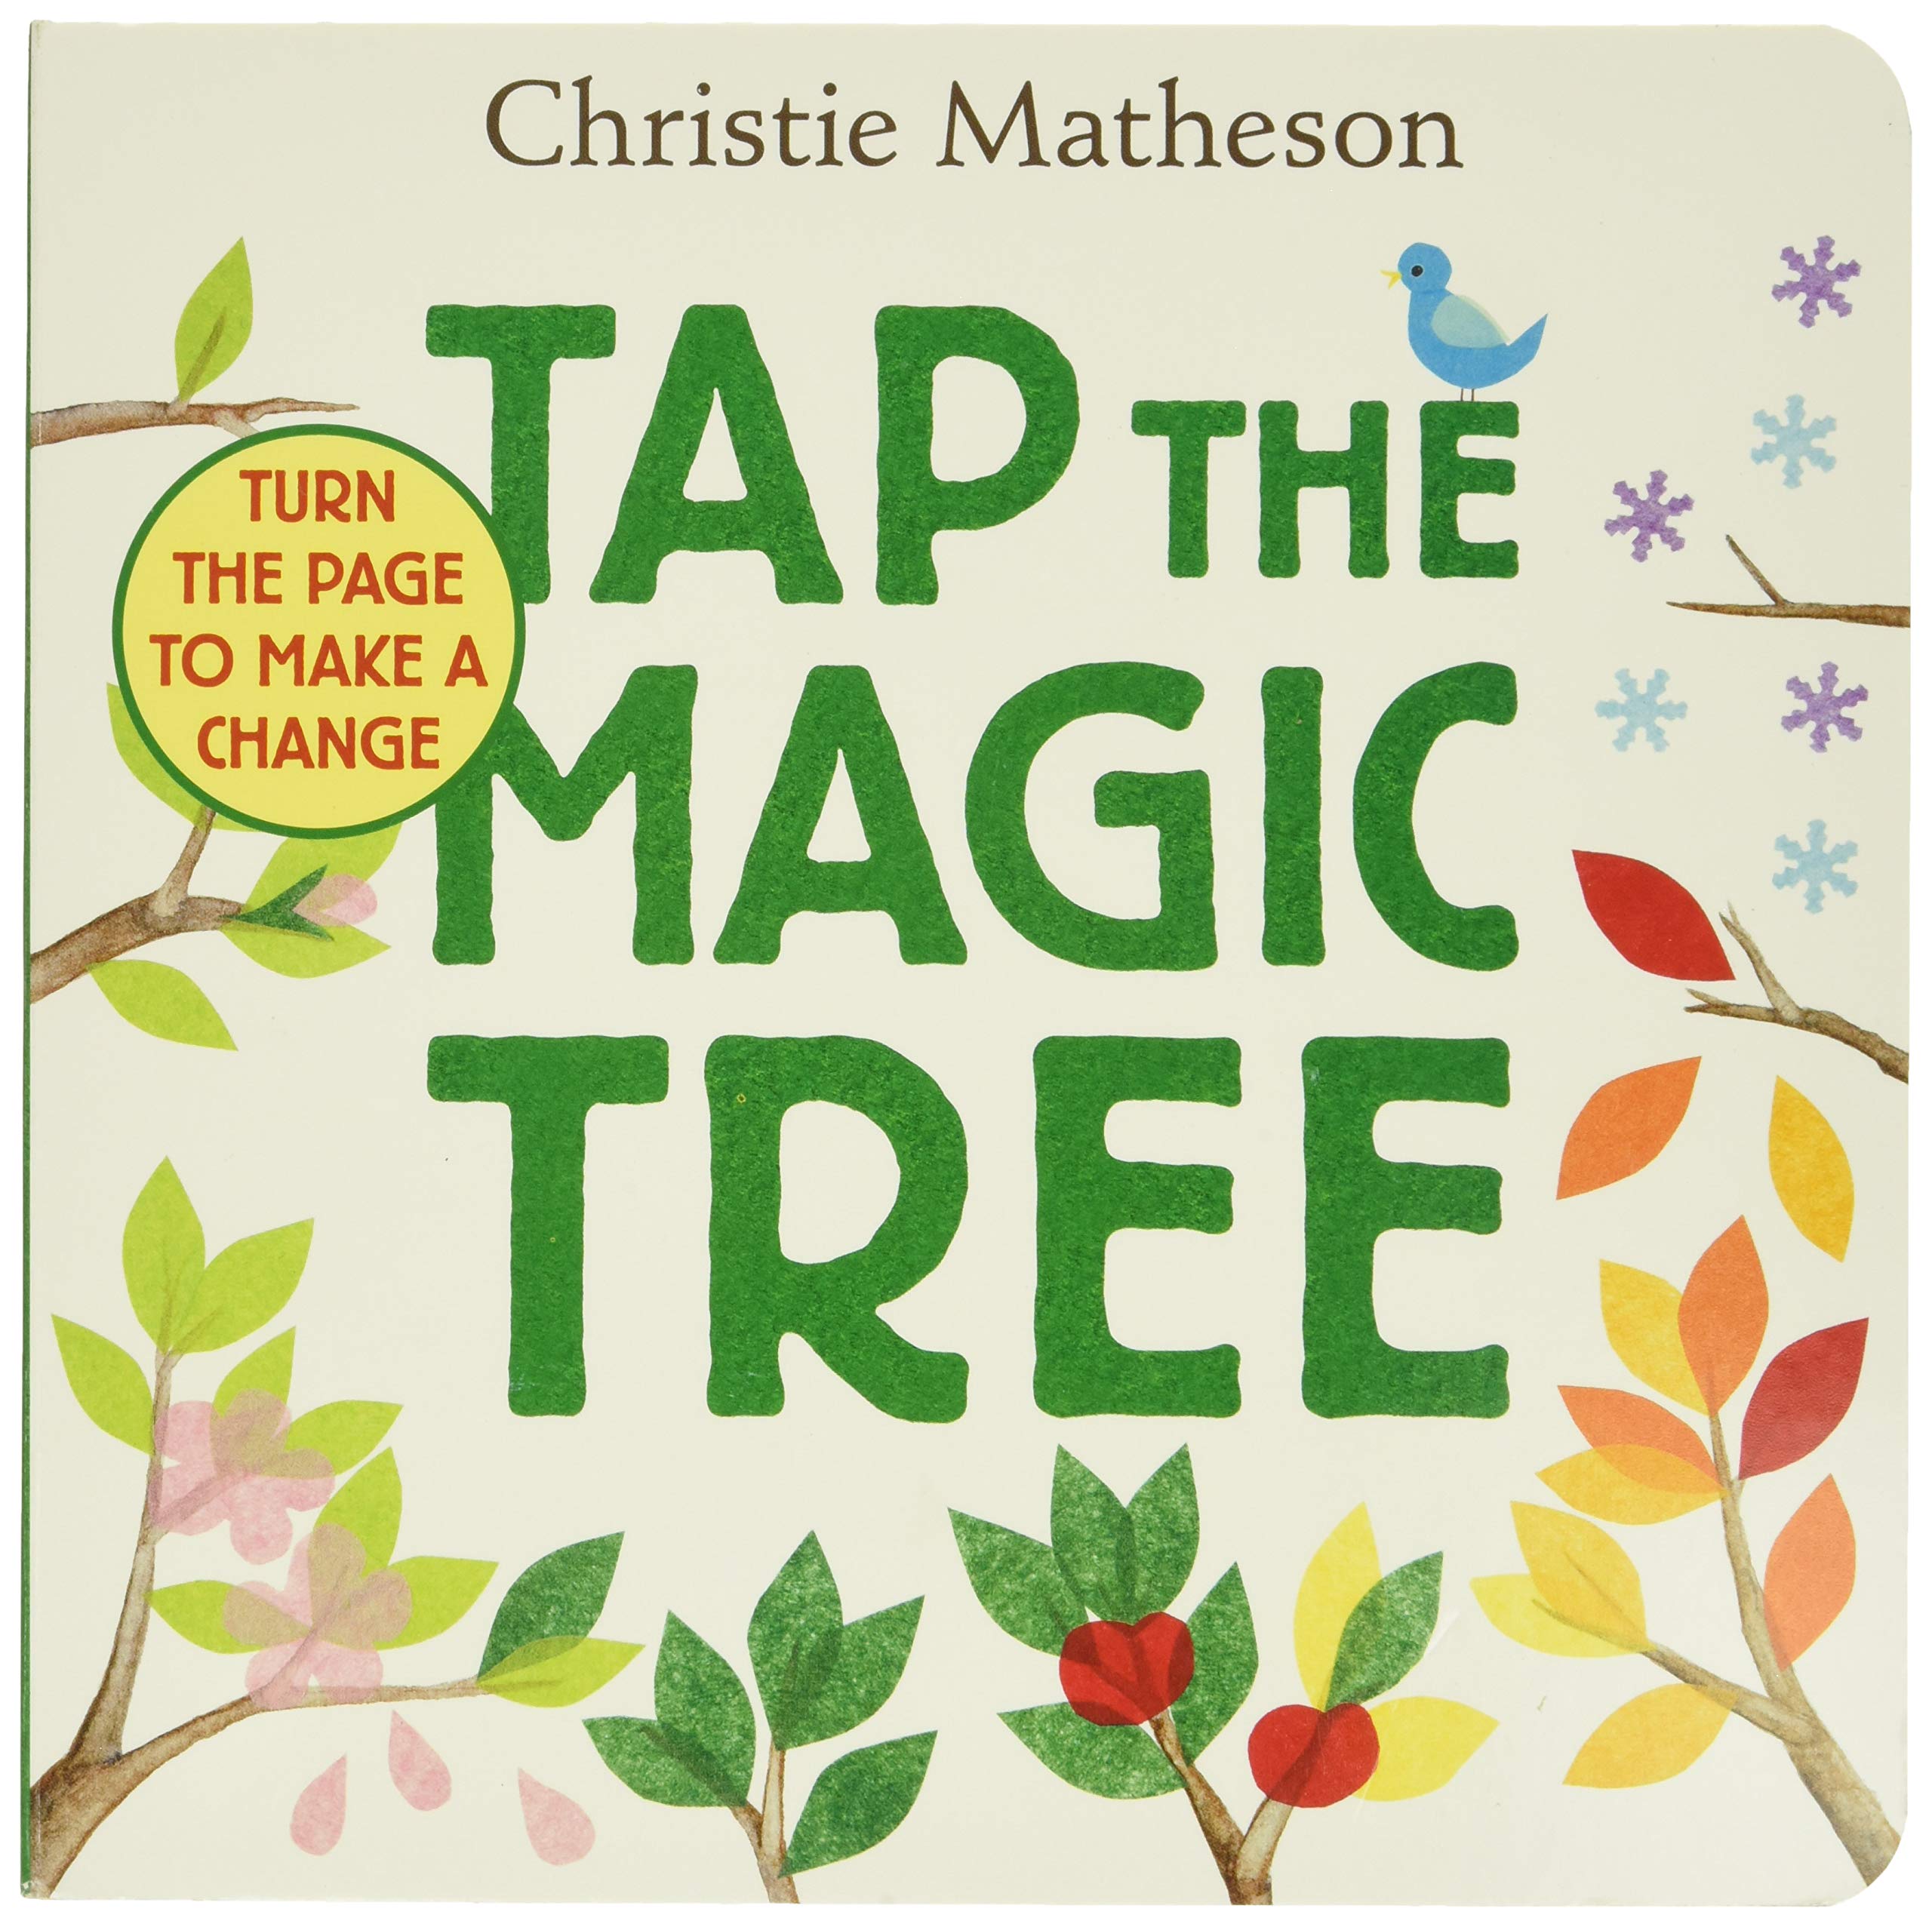 speech and language teaching concepts for Tap the Magic Tree in speech therapy​ ​